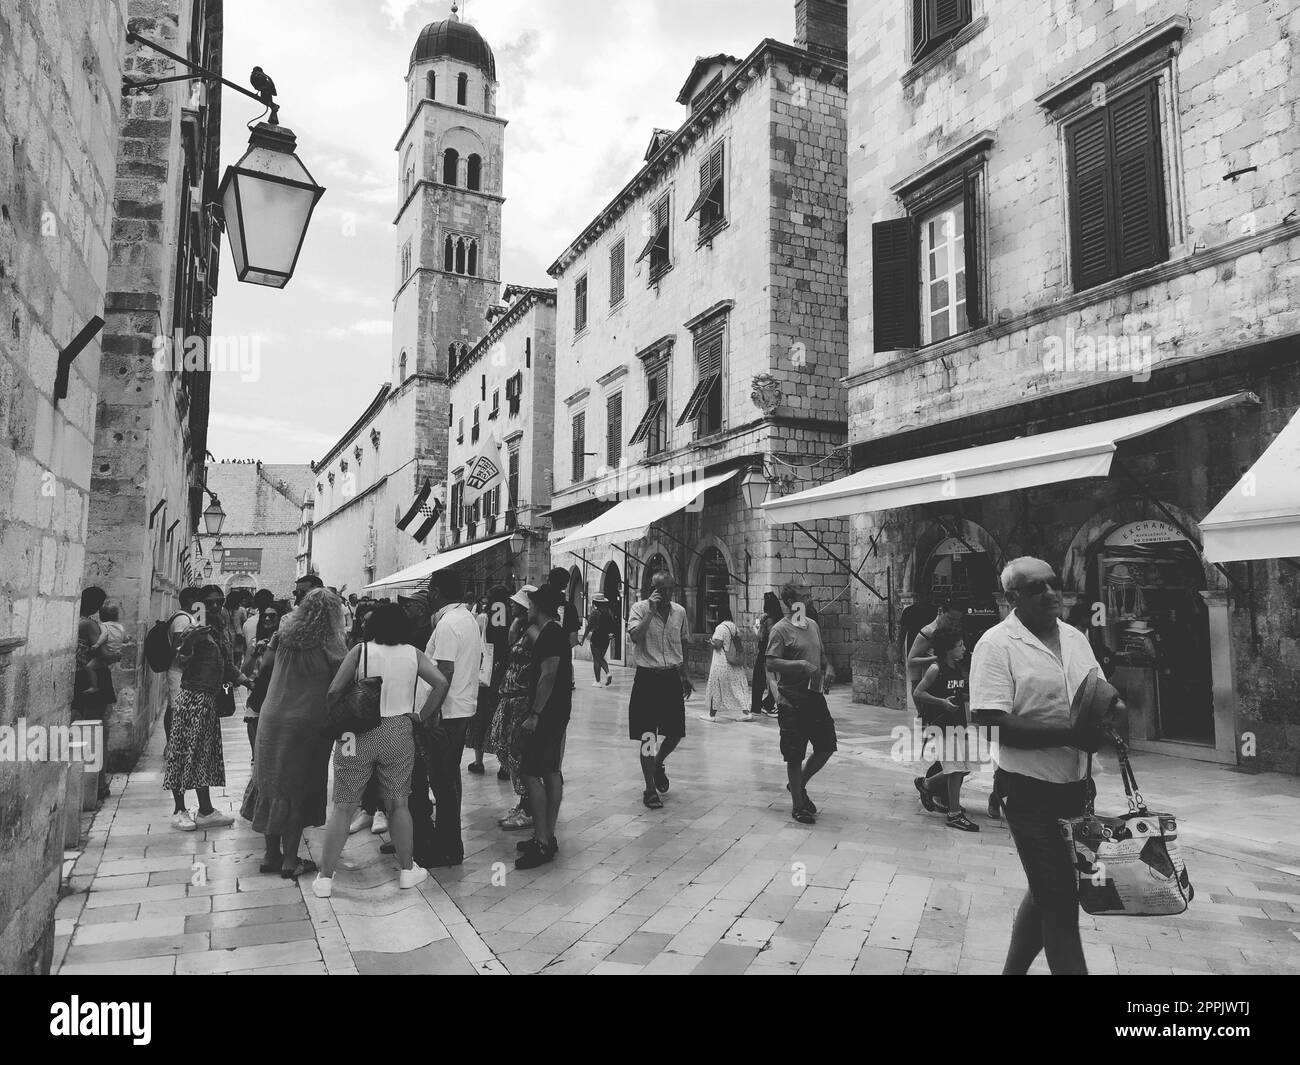 Stradun, Stradone is the main street of the historic city center of Dubrovnik in Croatia. architectural sights. A popular place for tourist walks. People are walking August 14, 2022 Black and white Stock Photo